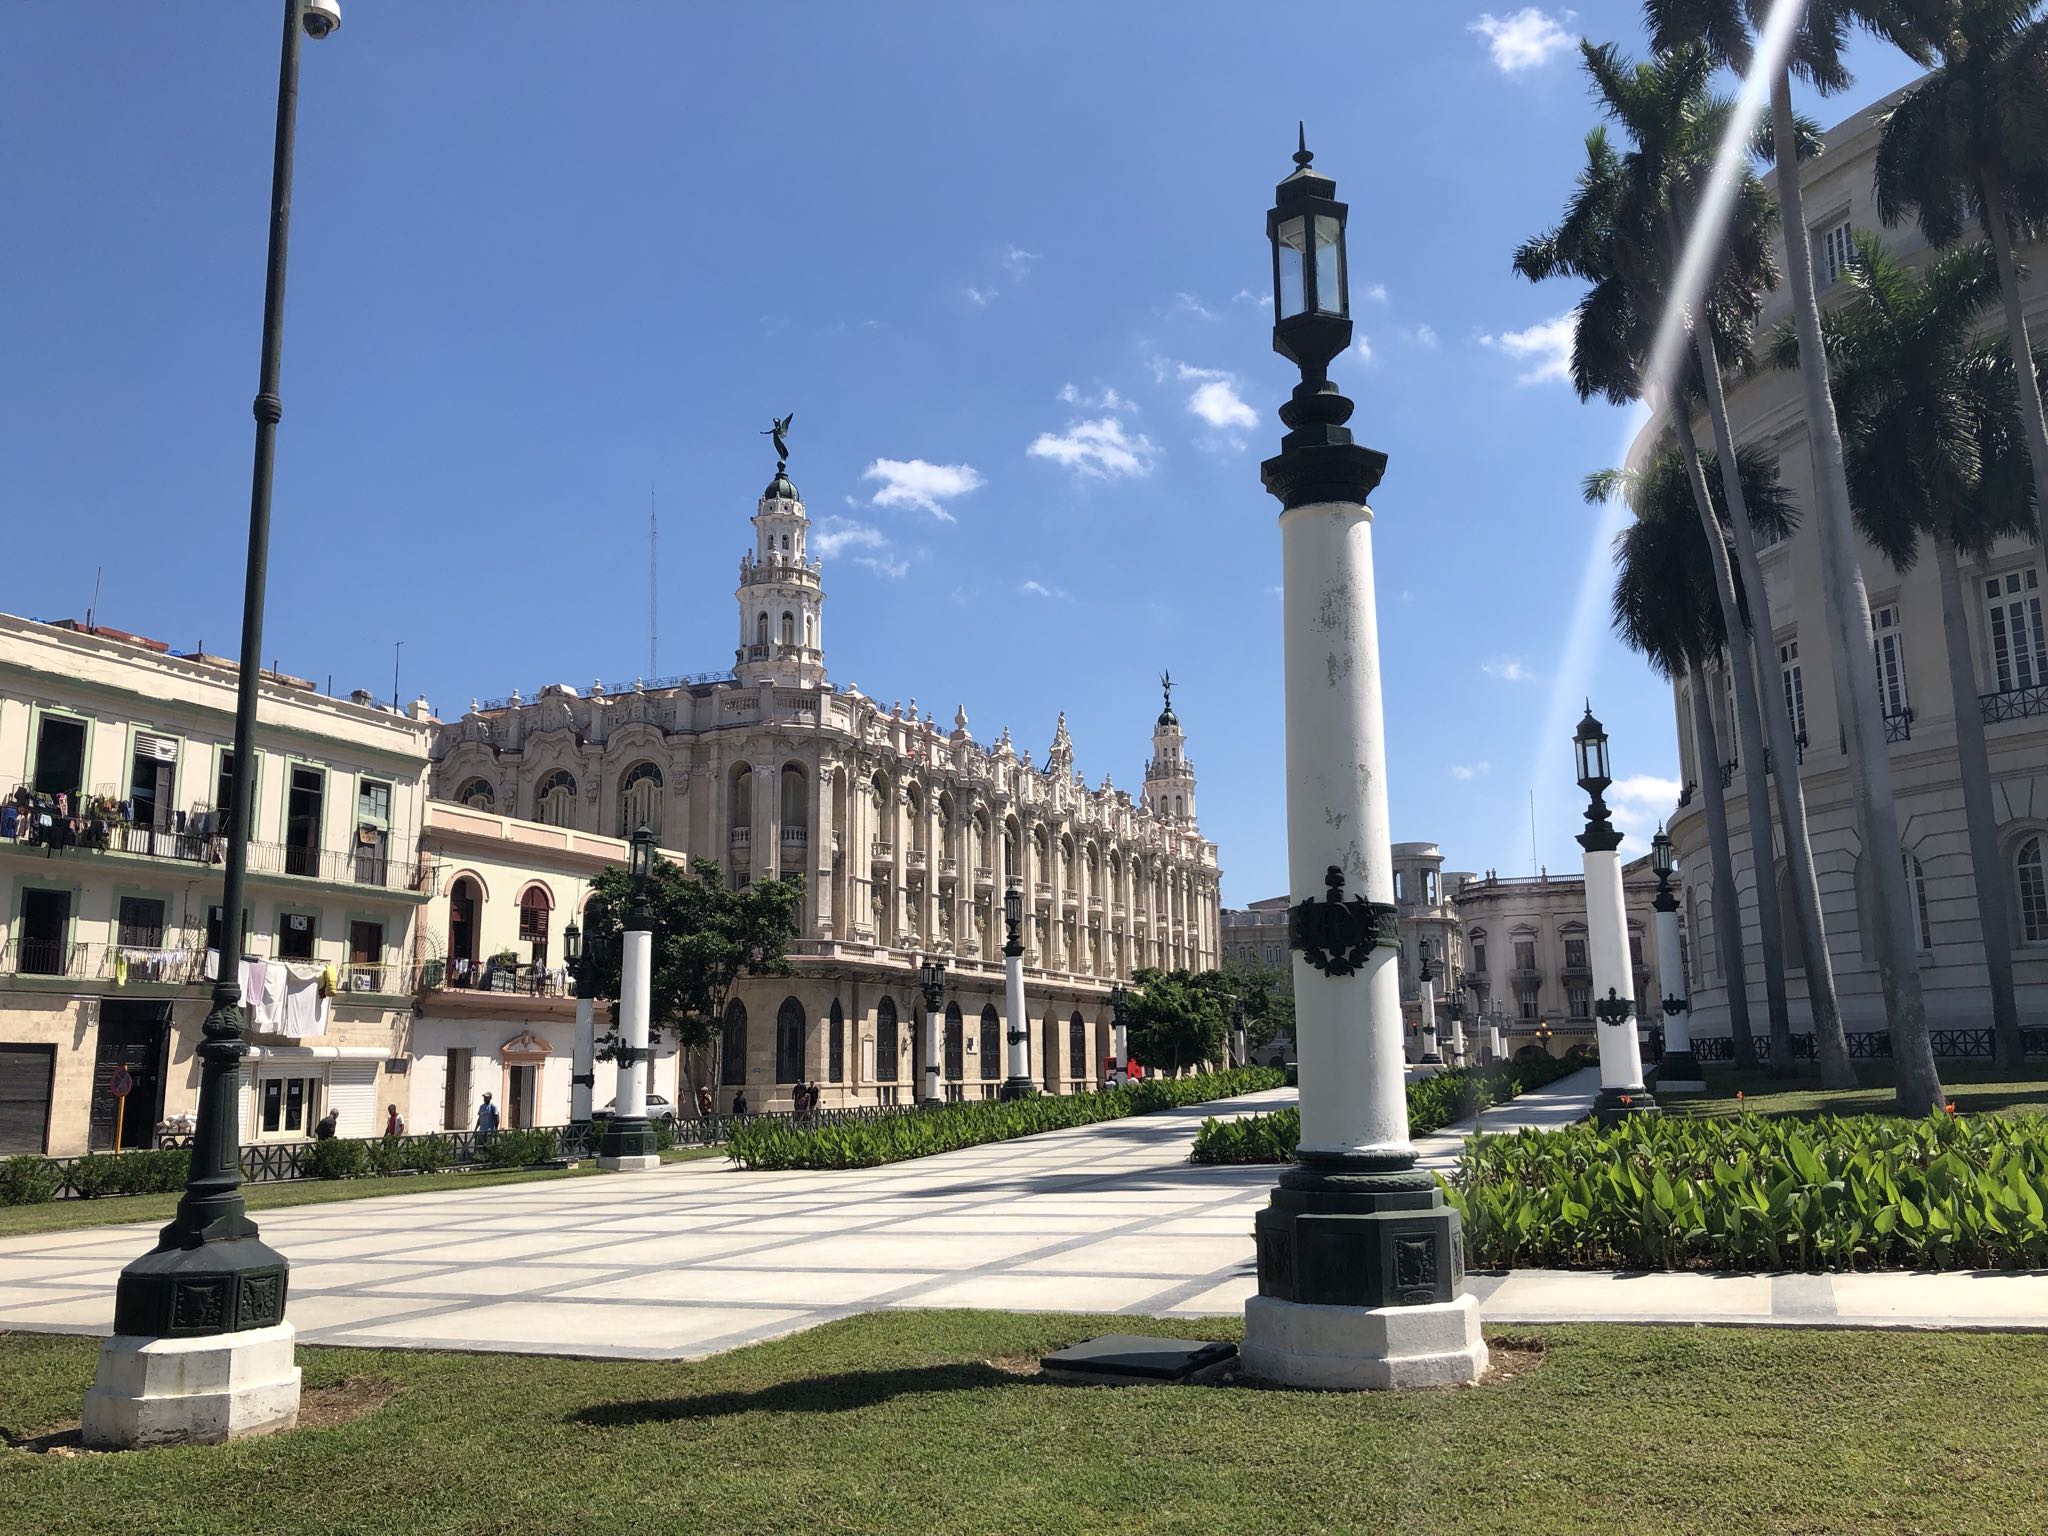 Photo 13 of 221 from the album Highlights Cuba 2019.